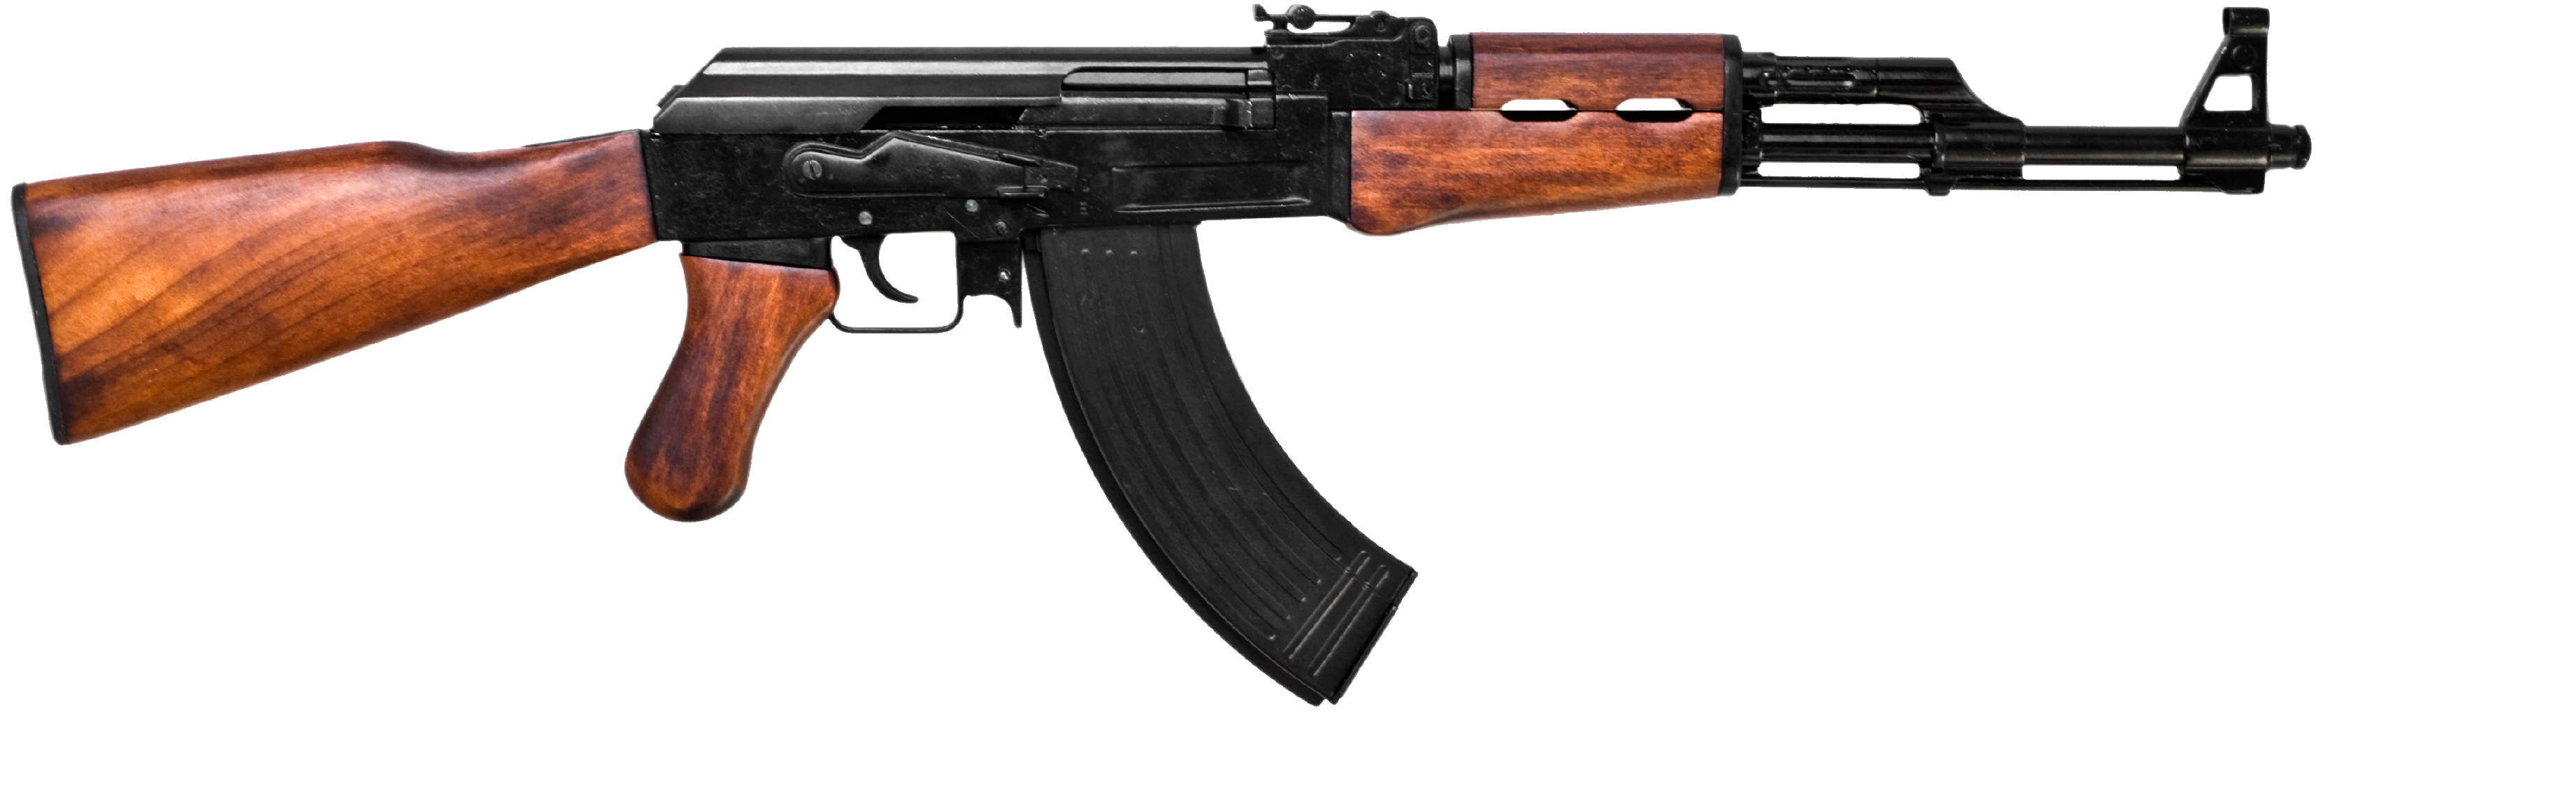 Wooden Assault Rifle PNG Image